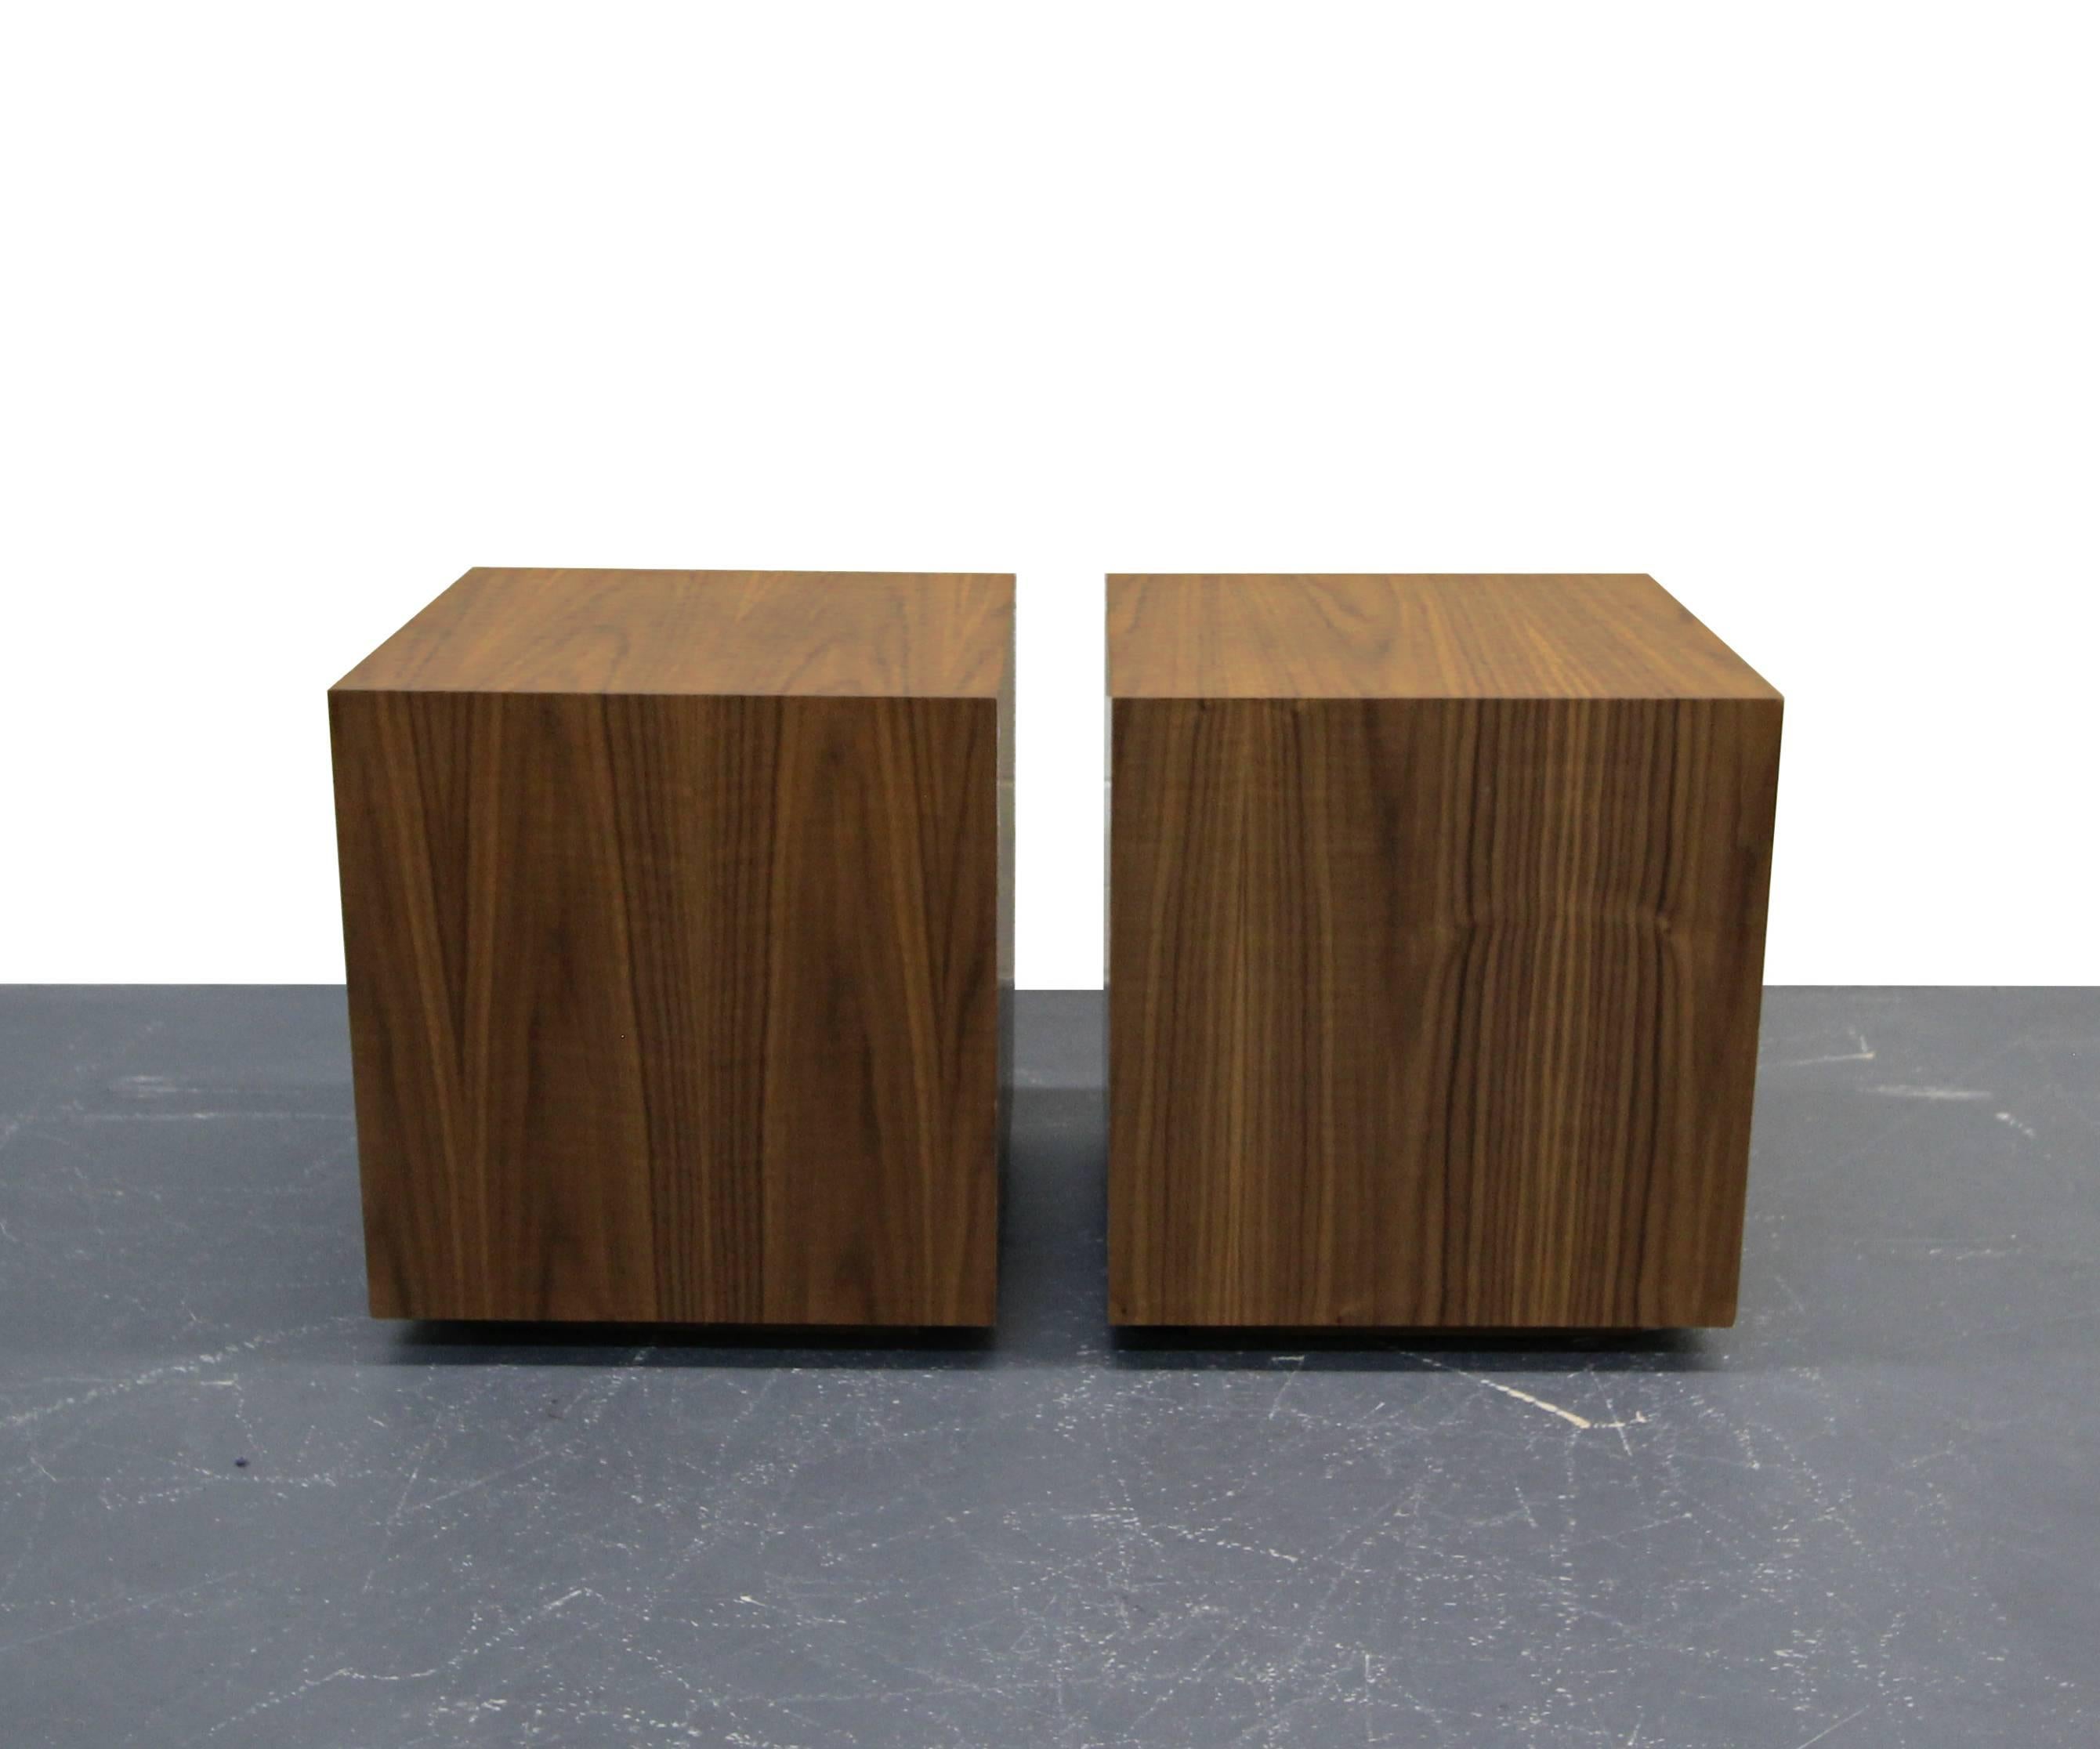 Perfect pair of walnut cubes with plinth bases. They would make perfect tables or stools.

       